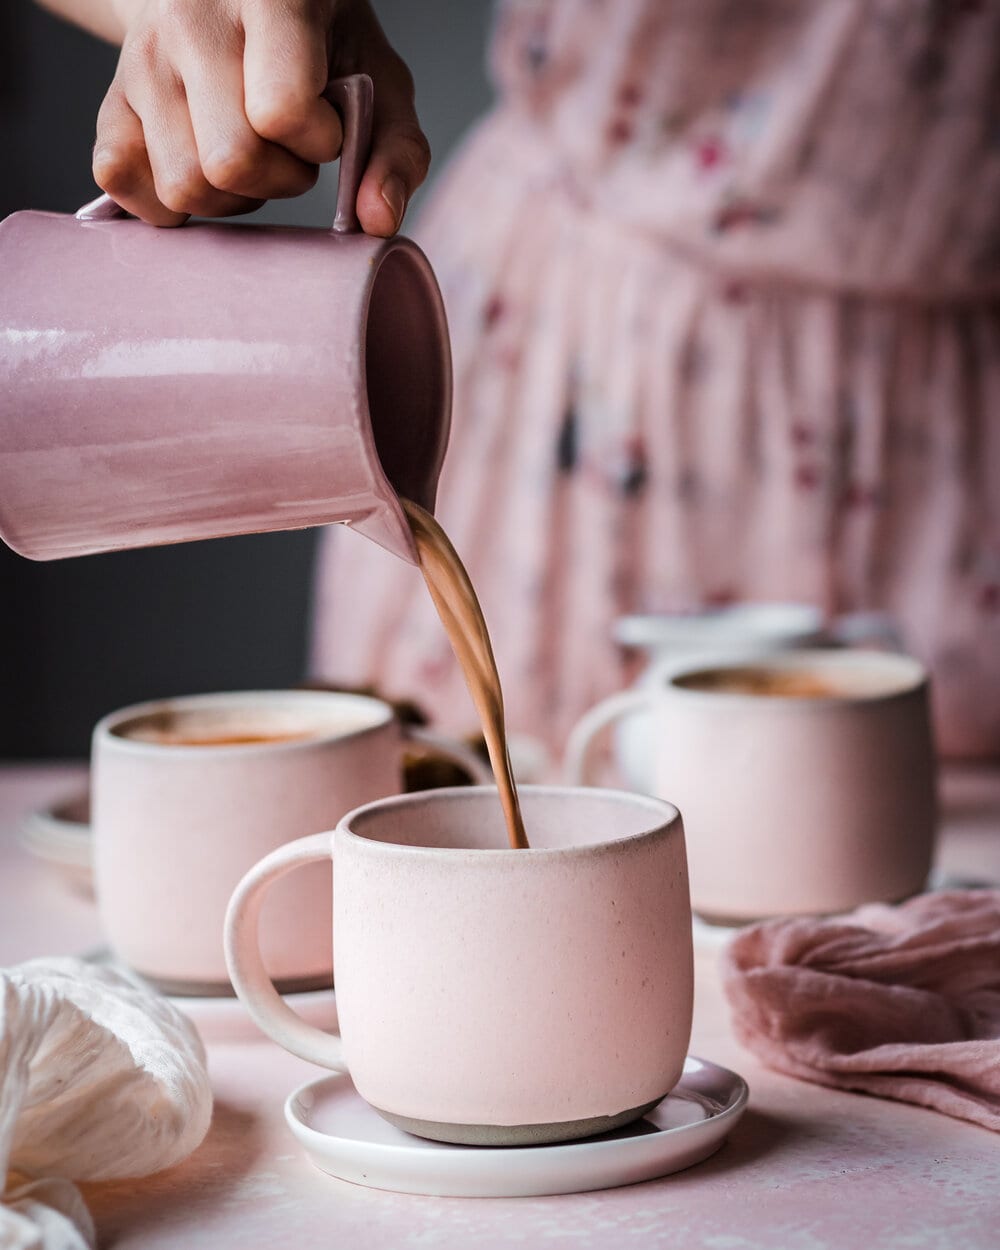 Woman pouring latte into a pink mug on a pink table.